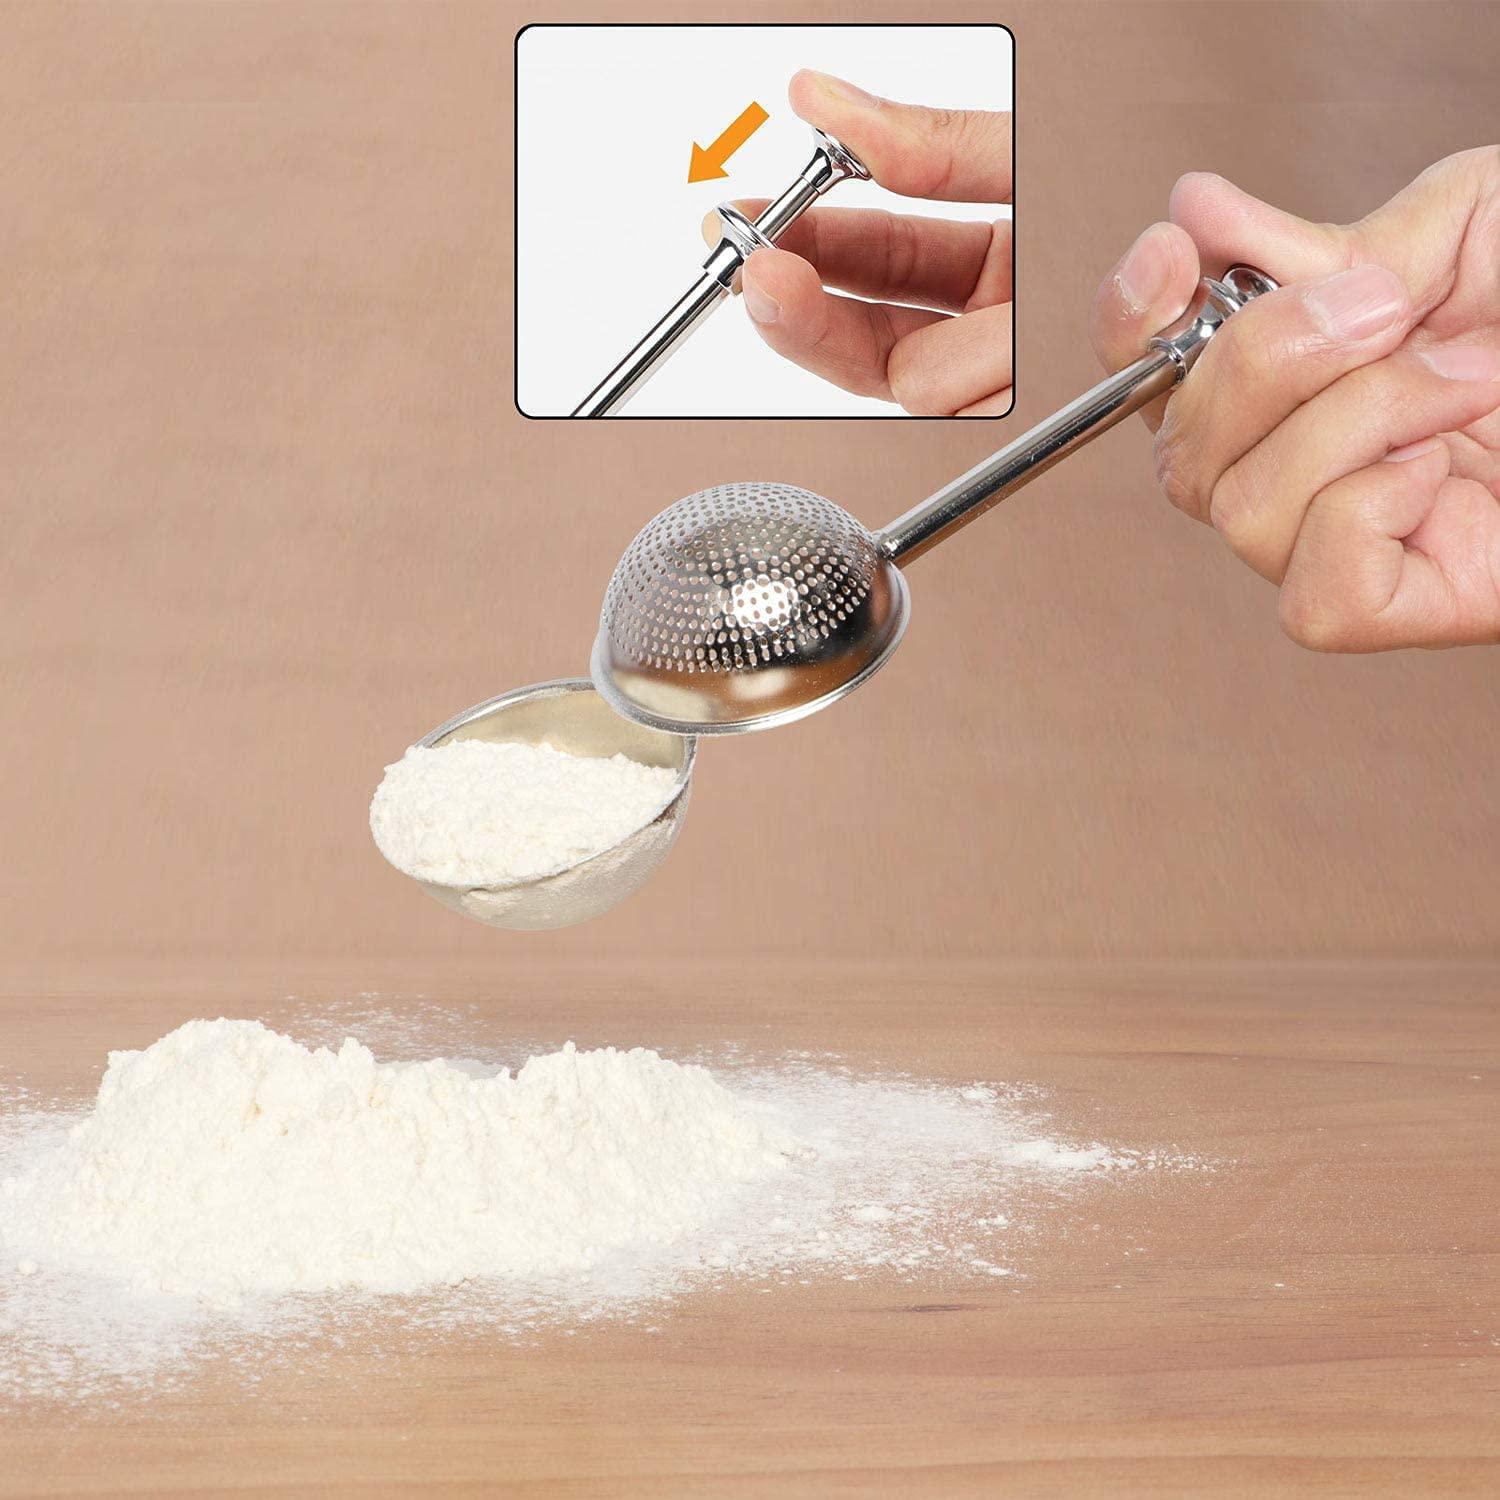 HULISEN Flour Duster for Baking, One-Handed Operation, 304 Stainless Steel Powdered Sugar Shaker Duster, Pick Up and Dust Flour Sifter, Gift Package - CookCave